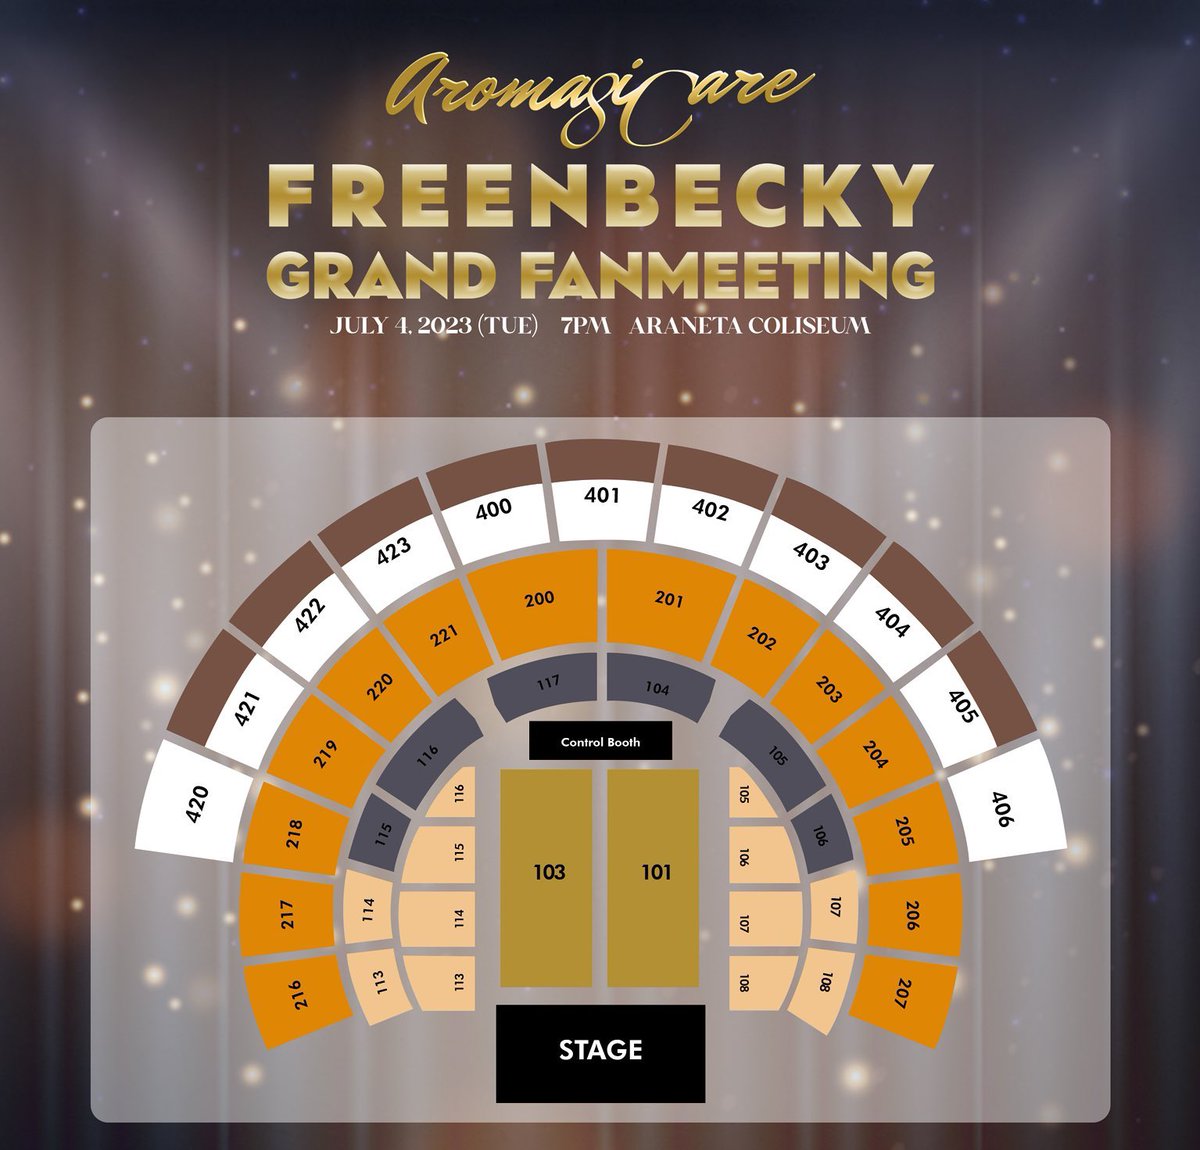 #FreenBeckyAromagicare seats availability UPDATE 
as of: